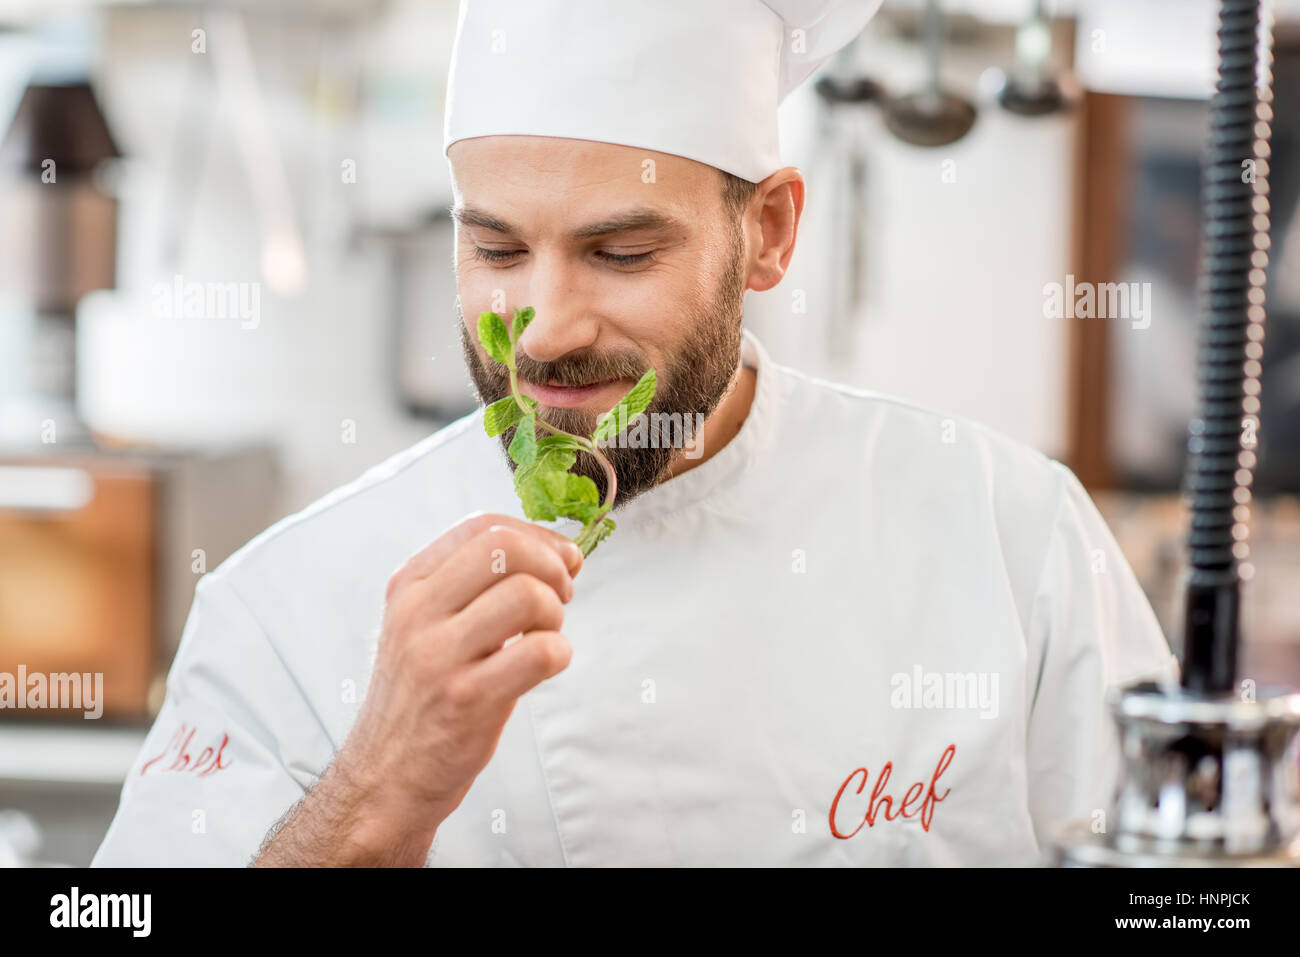 Handsome chef cook checking the freshness of green mint at the restaurant kitchen Stock Photo